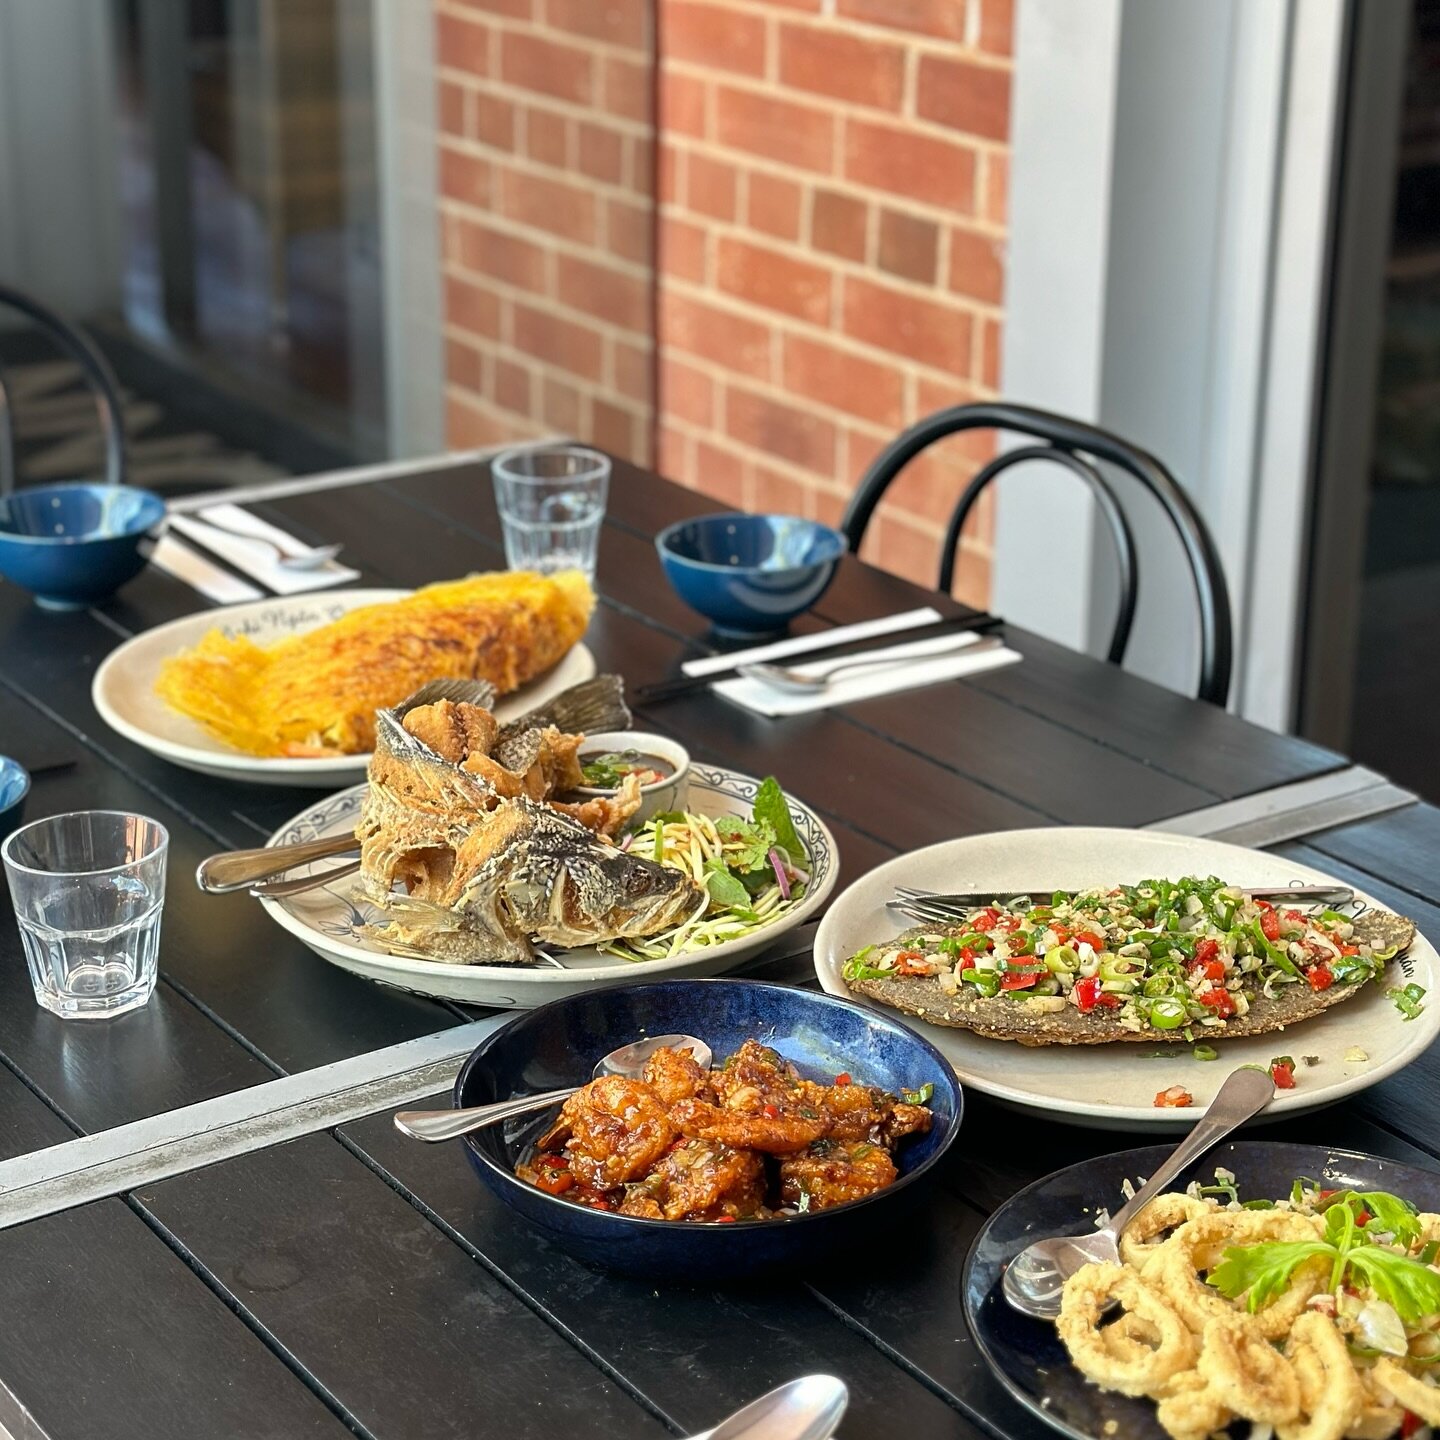 Nicer weather for an outdoor dining 🍽️